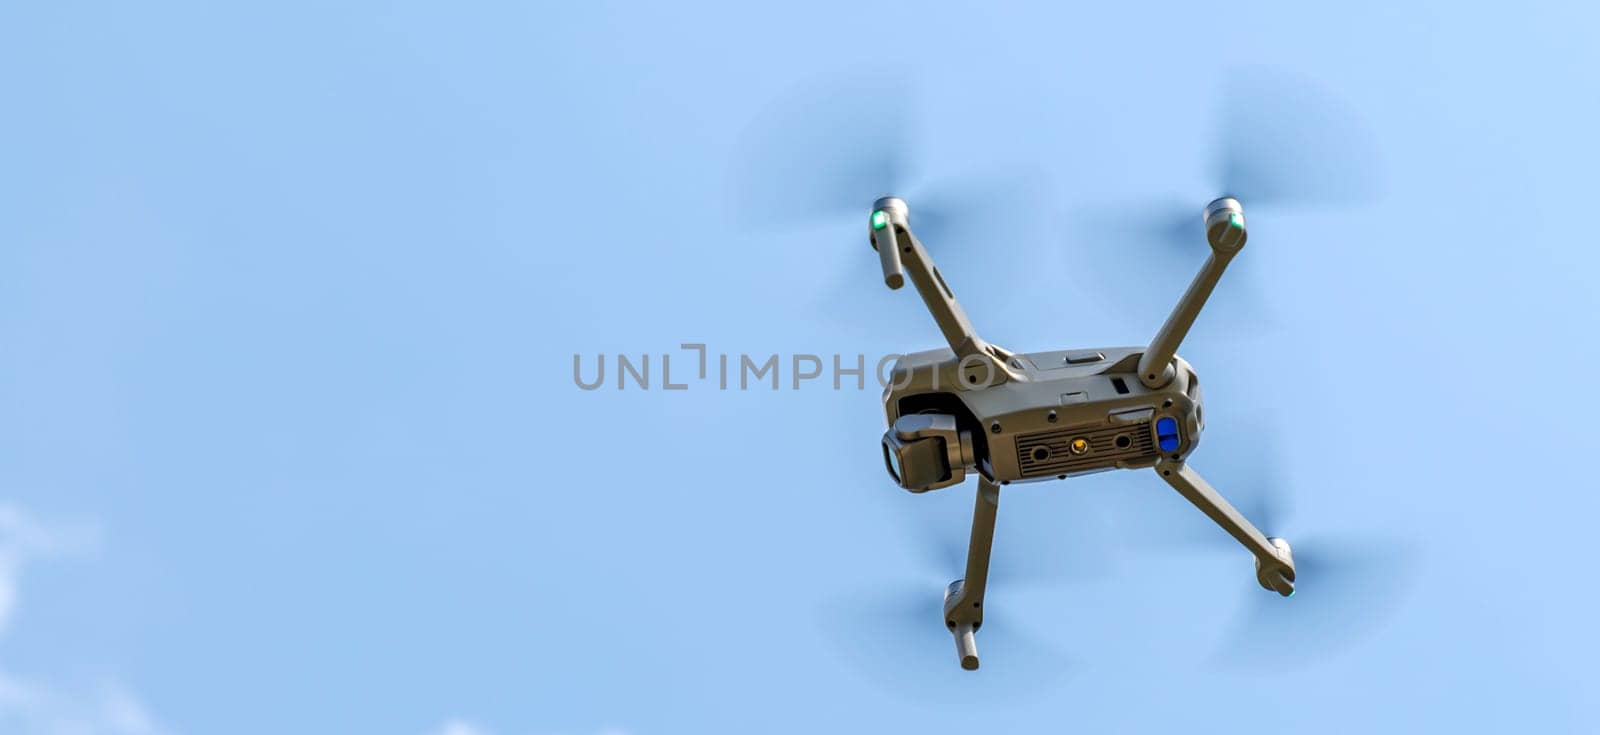 Panoramic view of a flying drone against a blue sky